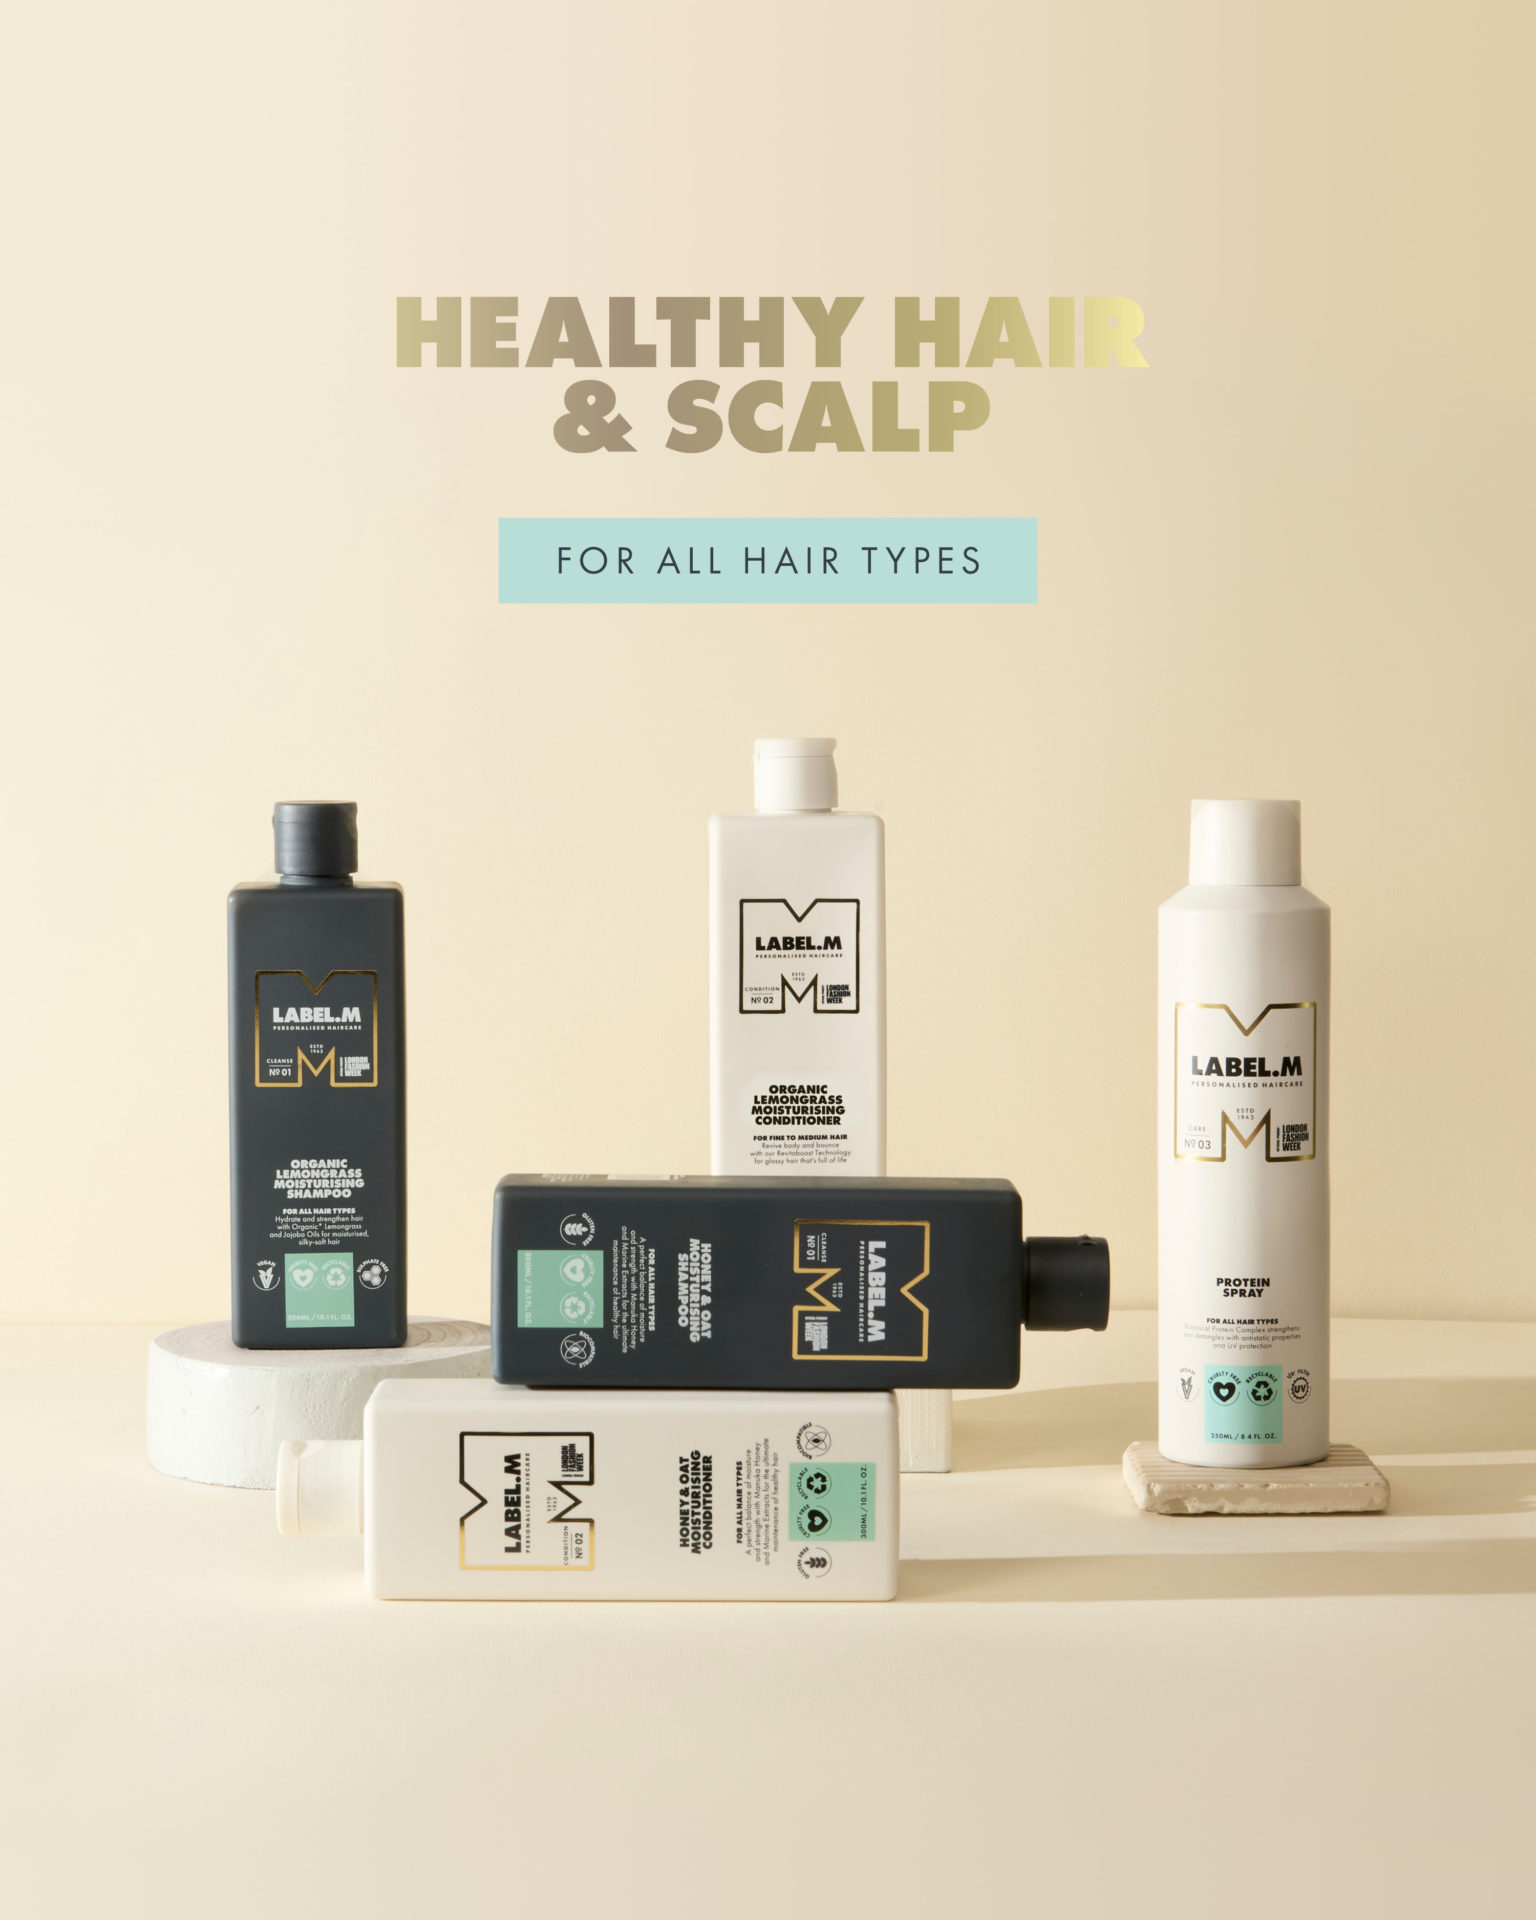 HEALTHY EVERYDAY HAIR LABEL M HAIRCARE IN BROADWAY